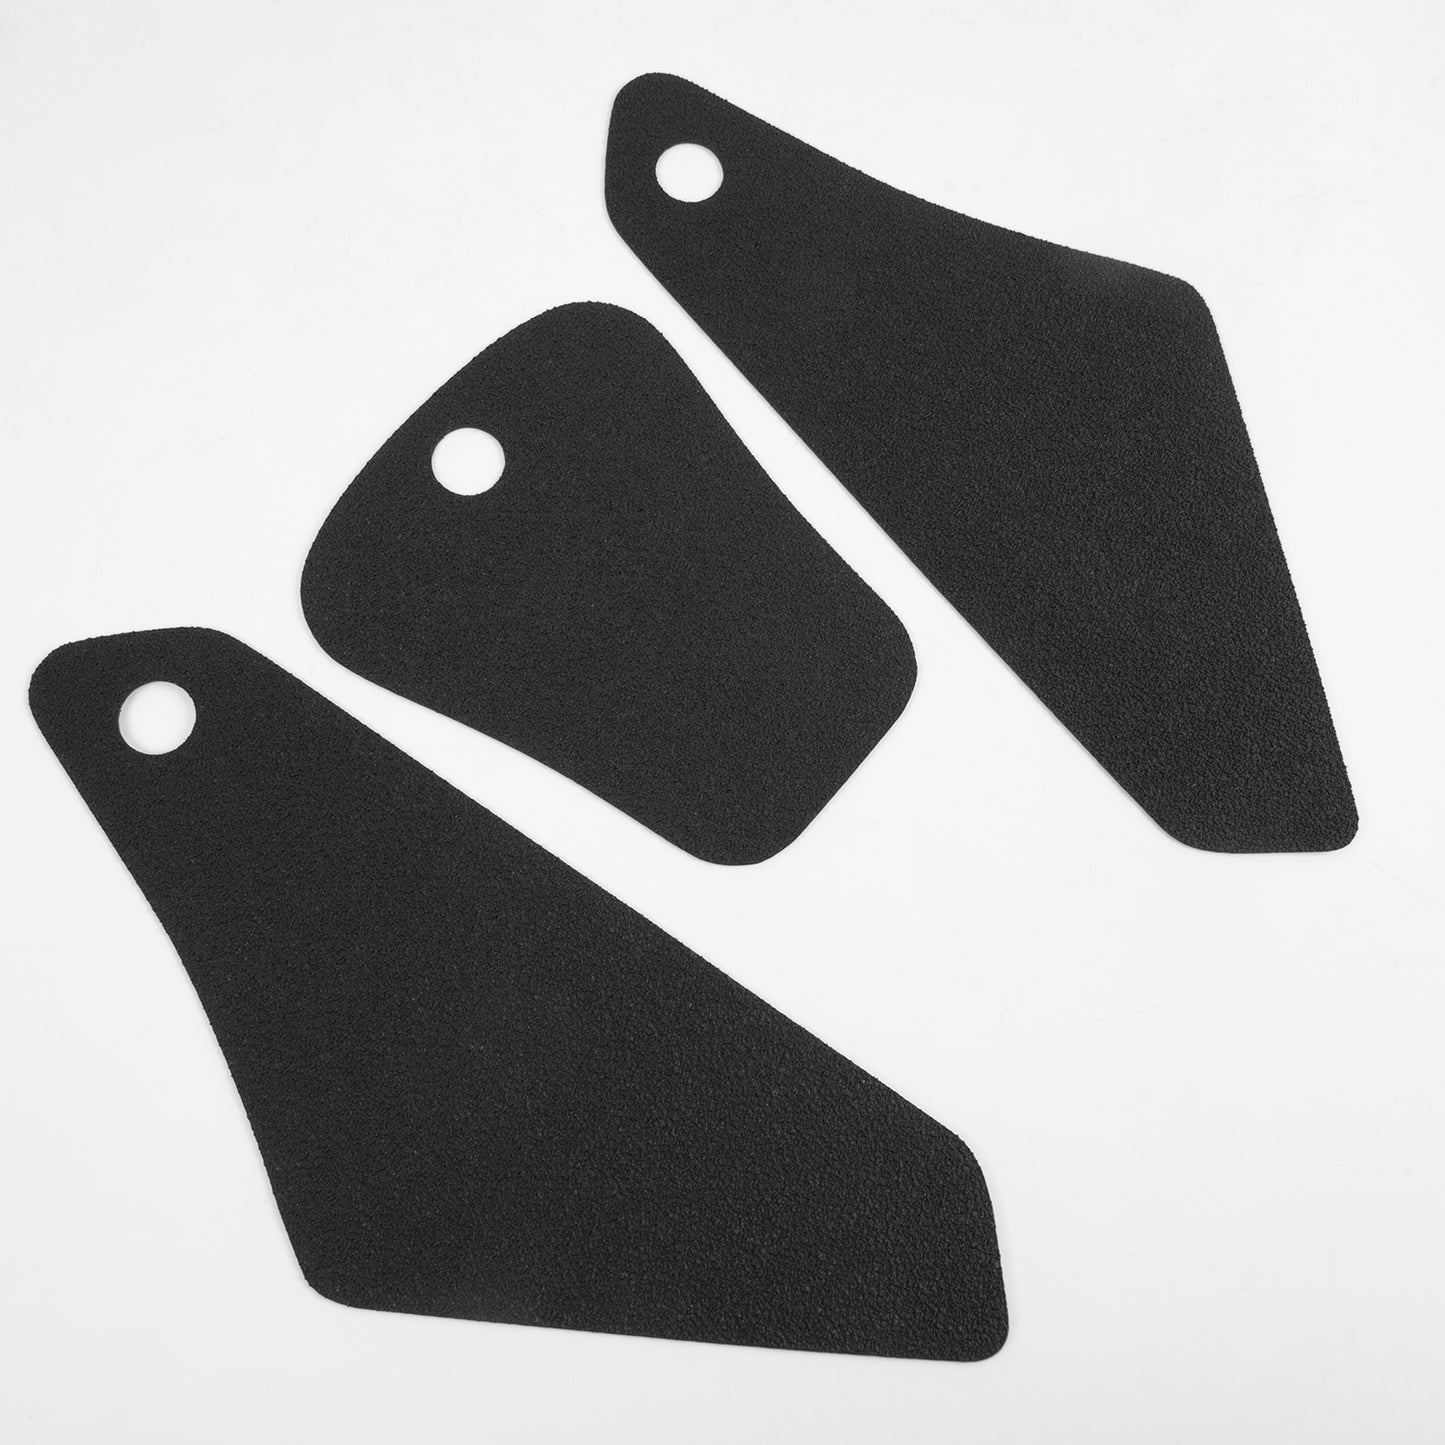 Wolfline Motorcycle Accessories Anti Slip Tank Pad Stickers Side Gas Tank Pad Knee Grip Decals Protection For BMW R1200GS 2004 2005 2006 2007 2008 2009 2010 2011 2012